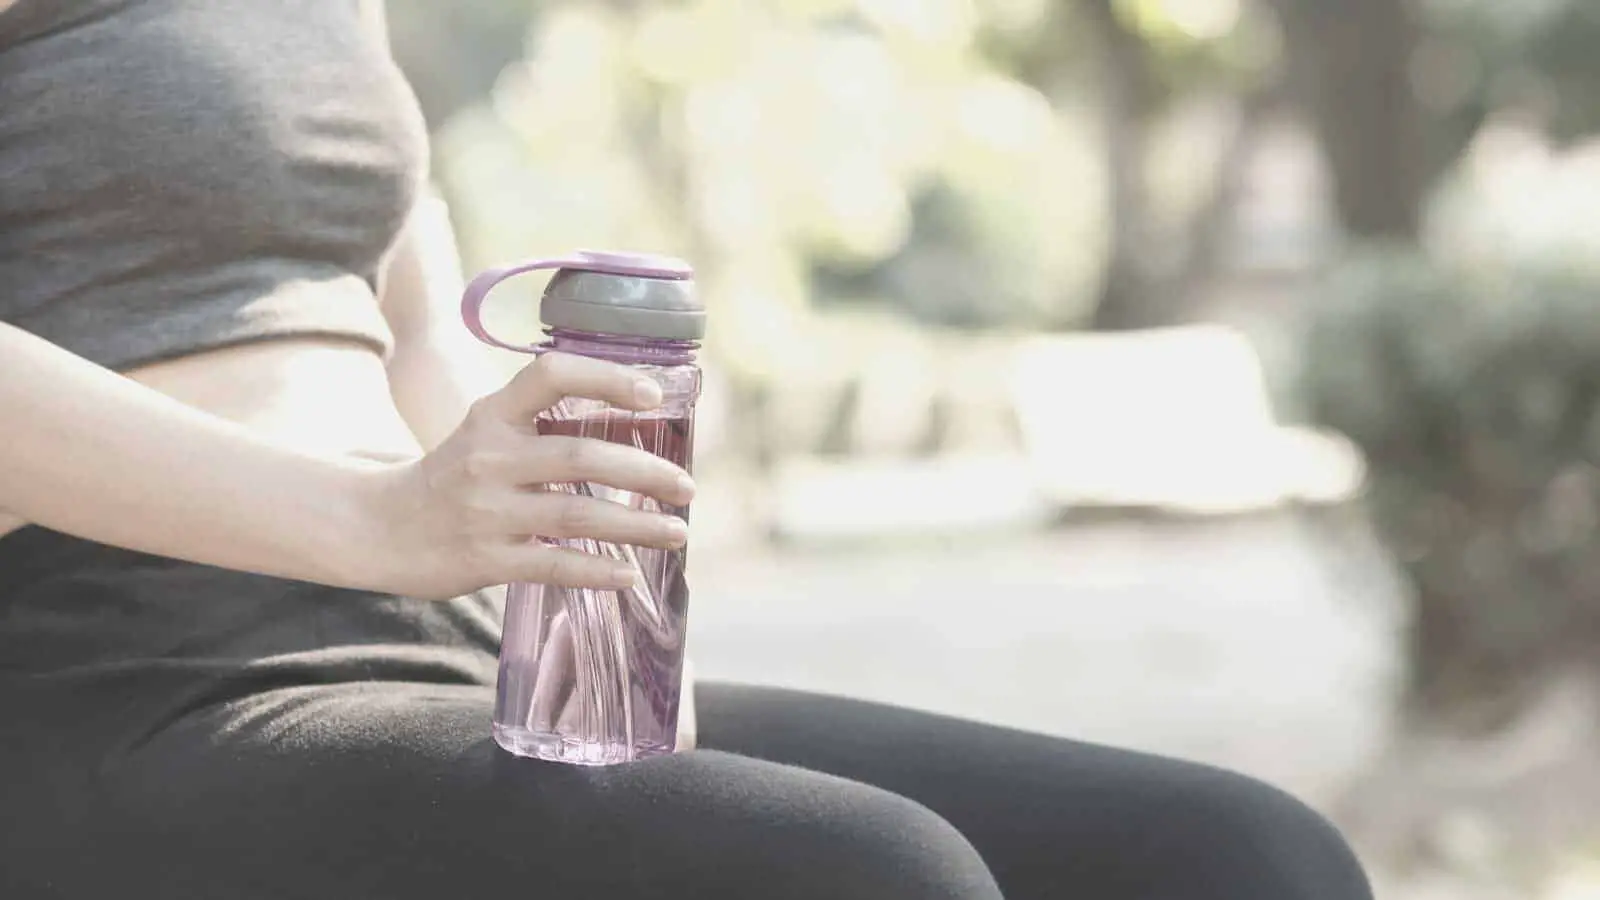 To drink water or not during yoga: that’s the question